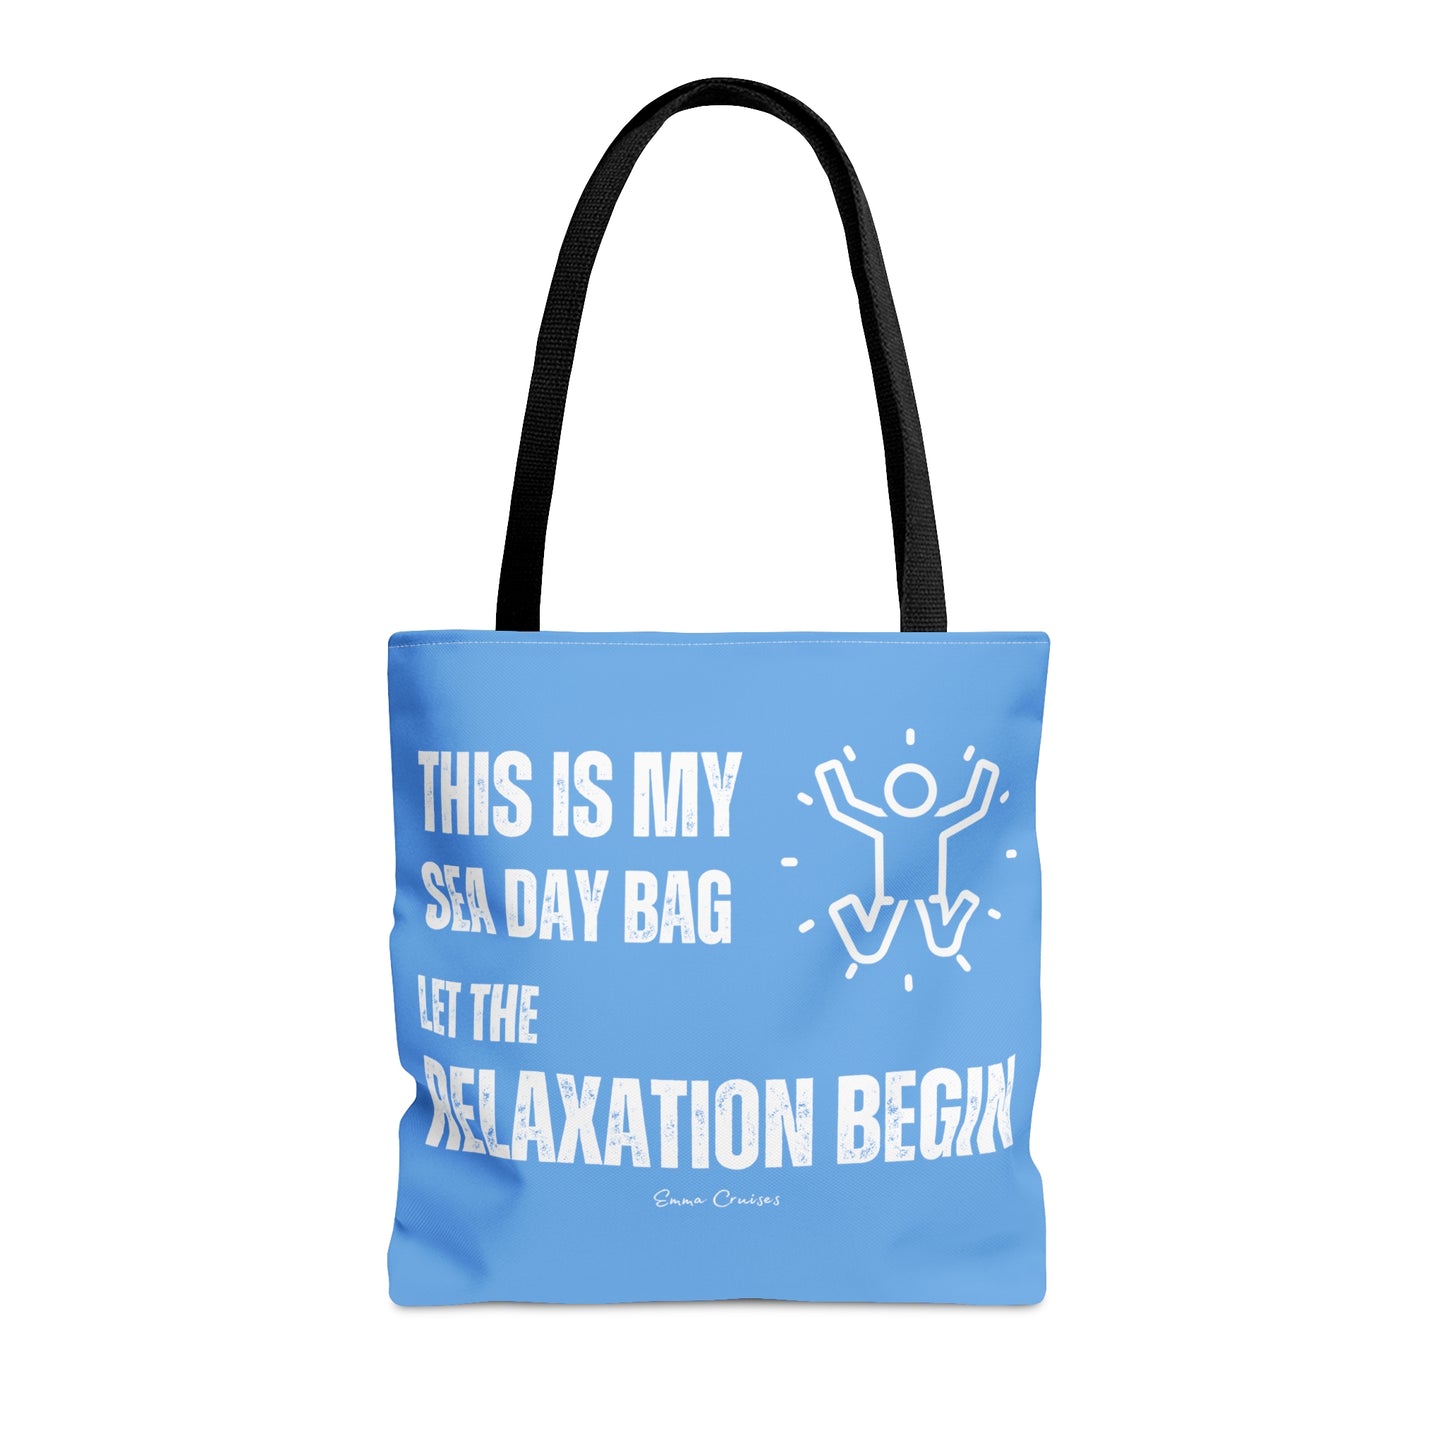 This is My Sea Day Bag - Bag